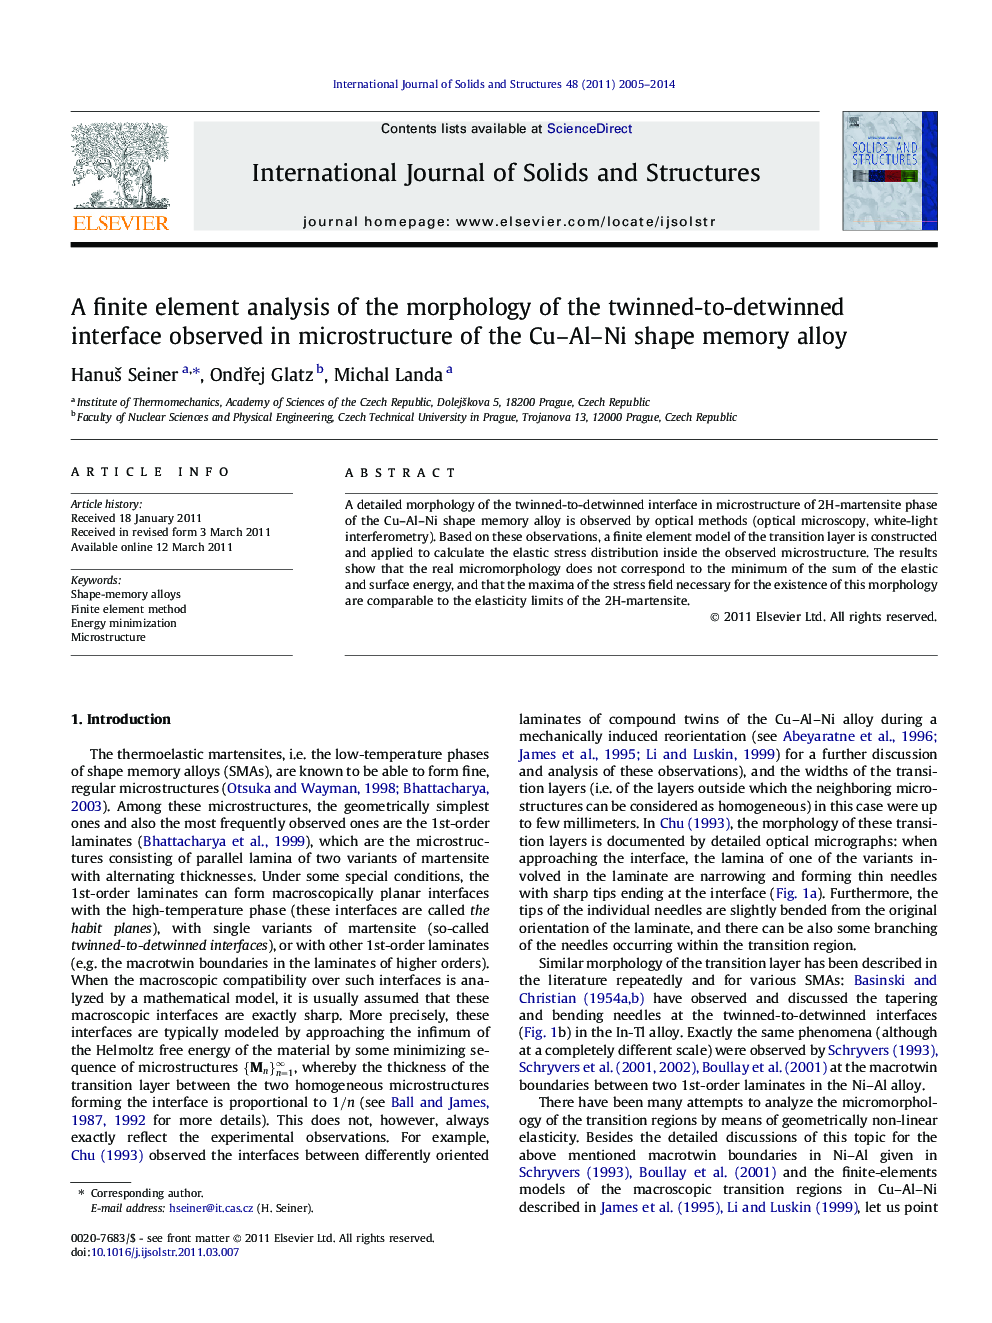 A finite element analysis of the morphology of the twinned-to-detwinned interface observed in microstructure of the Cu–Al–Ni shape memory alloy